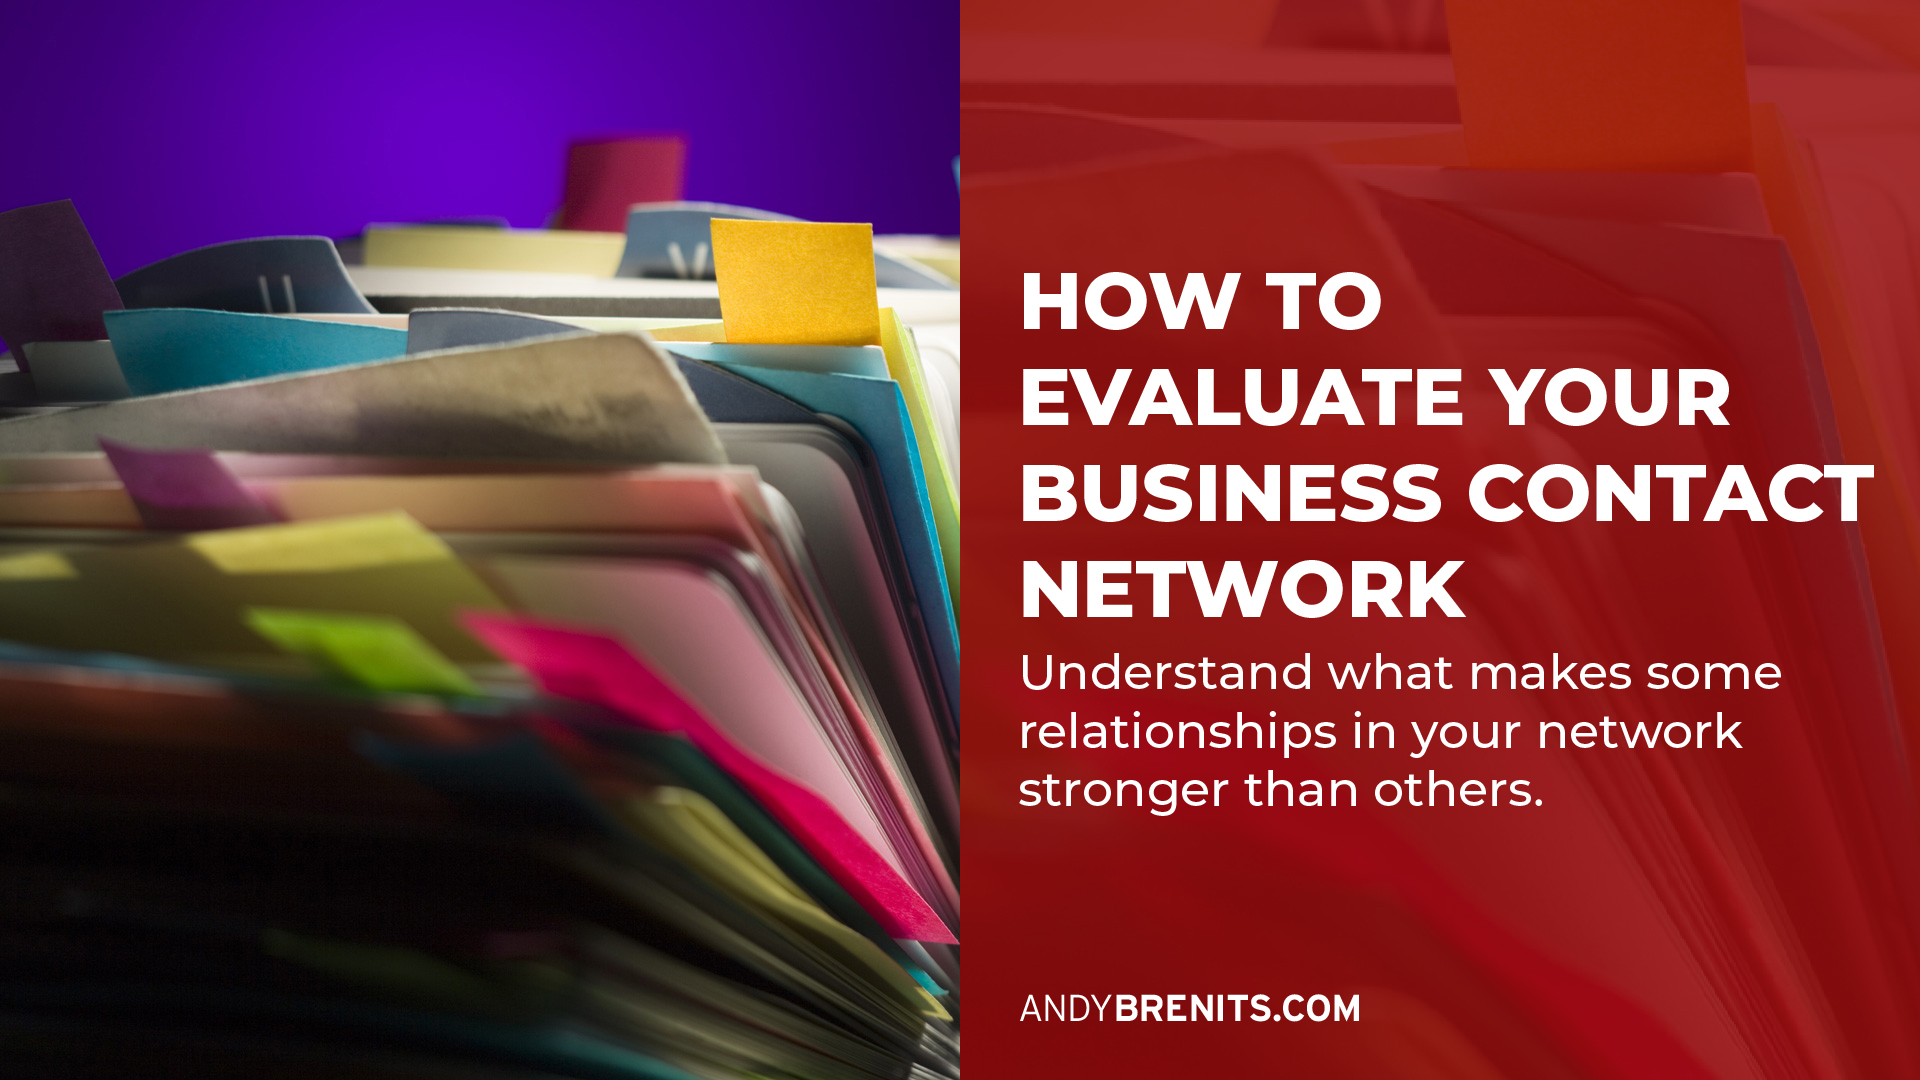 How to Evaluate Your Business Contact Network